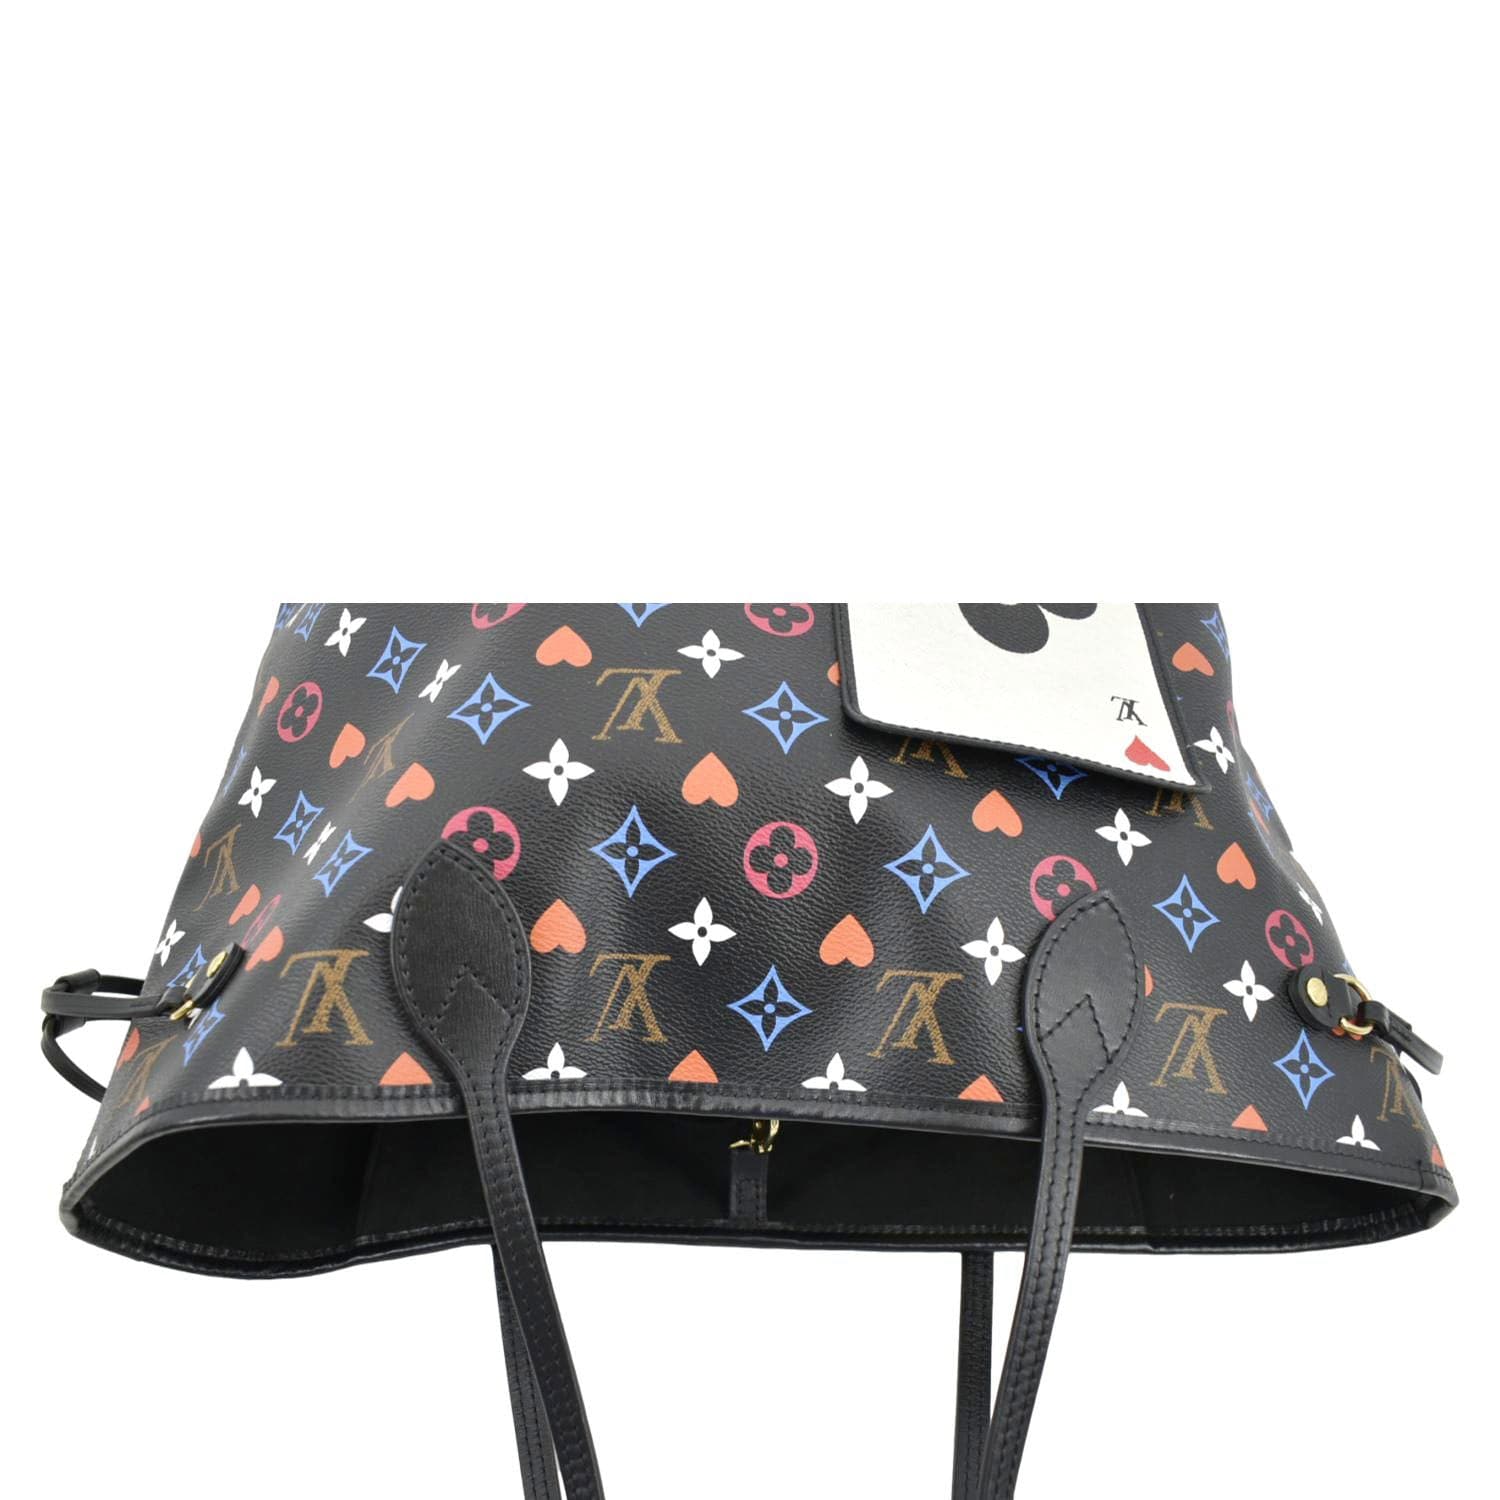 LOUIS VUITTON Monogram Game On Neverfull MM Tote Bag Multicolor M57462 LV  34430